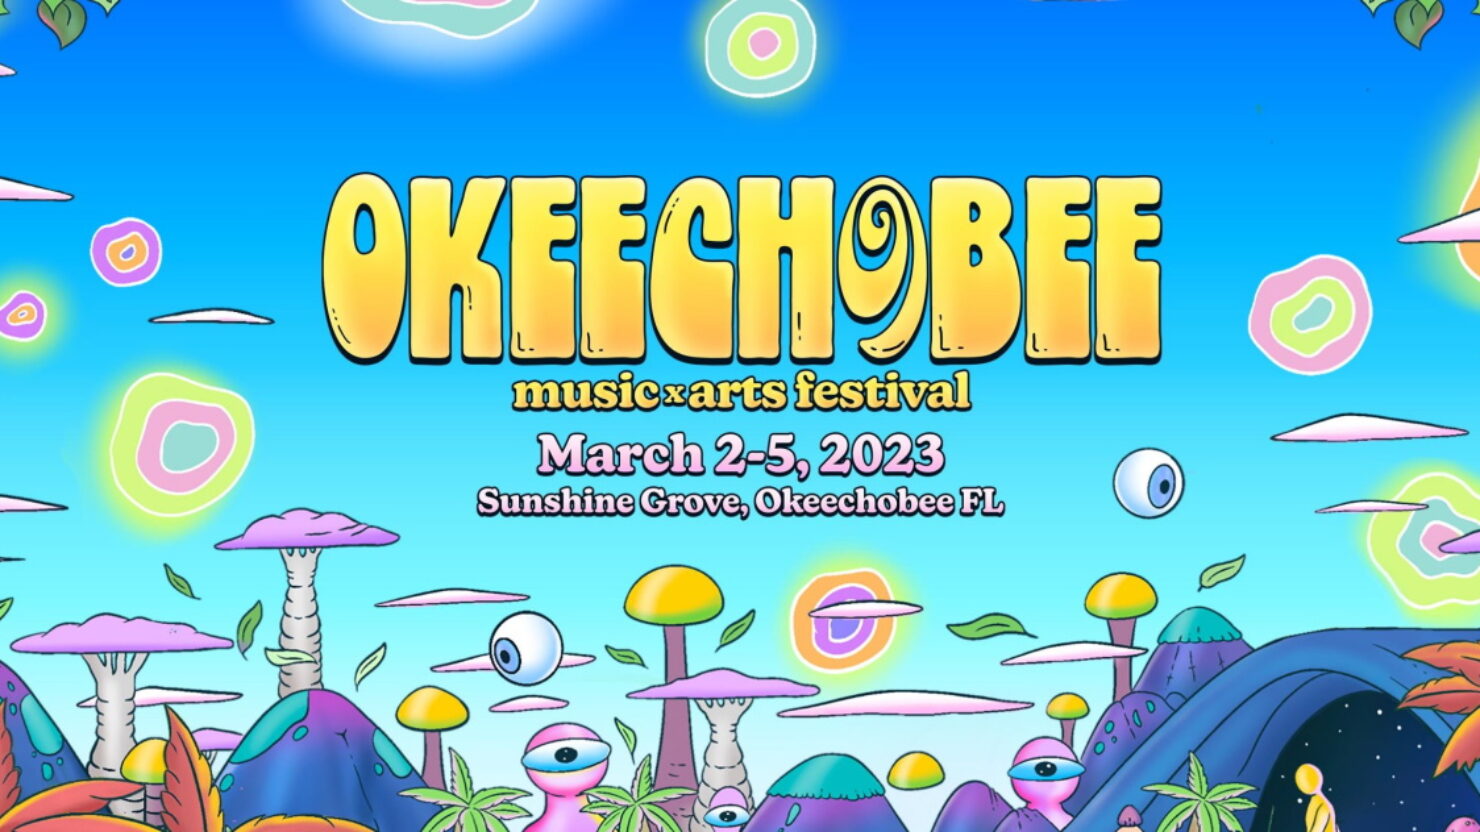 Okeechobee 2023 Lineup Announced: Know the Complete List of Performers